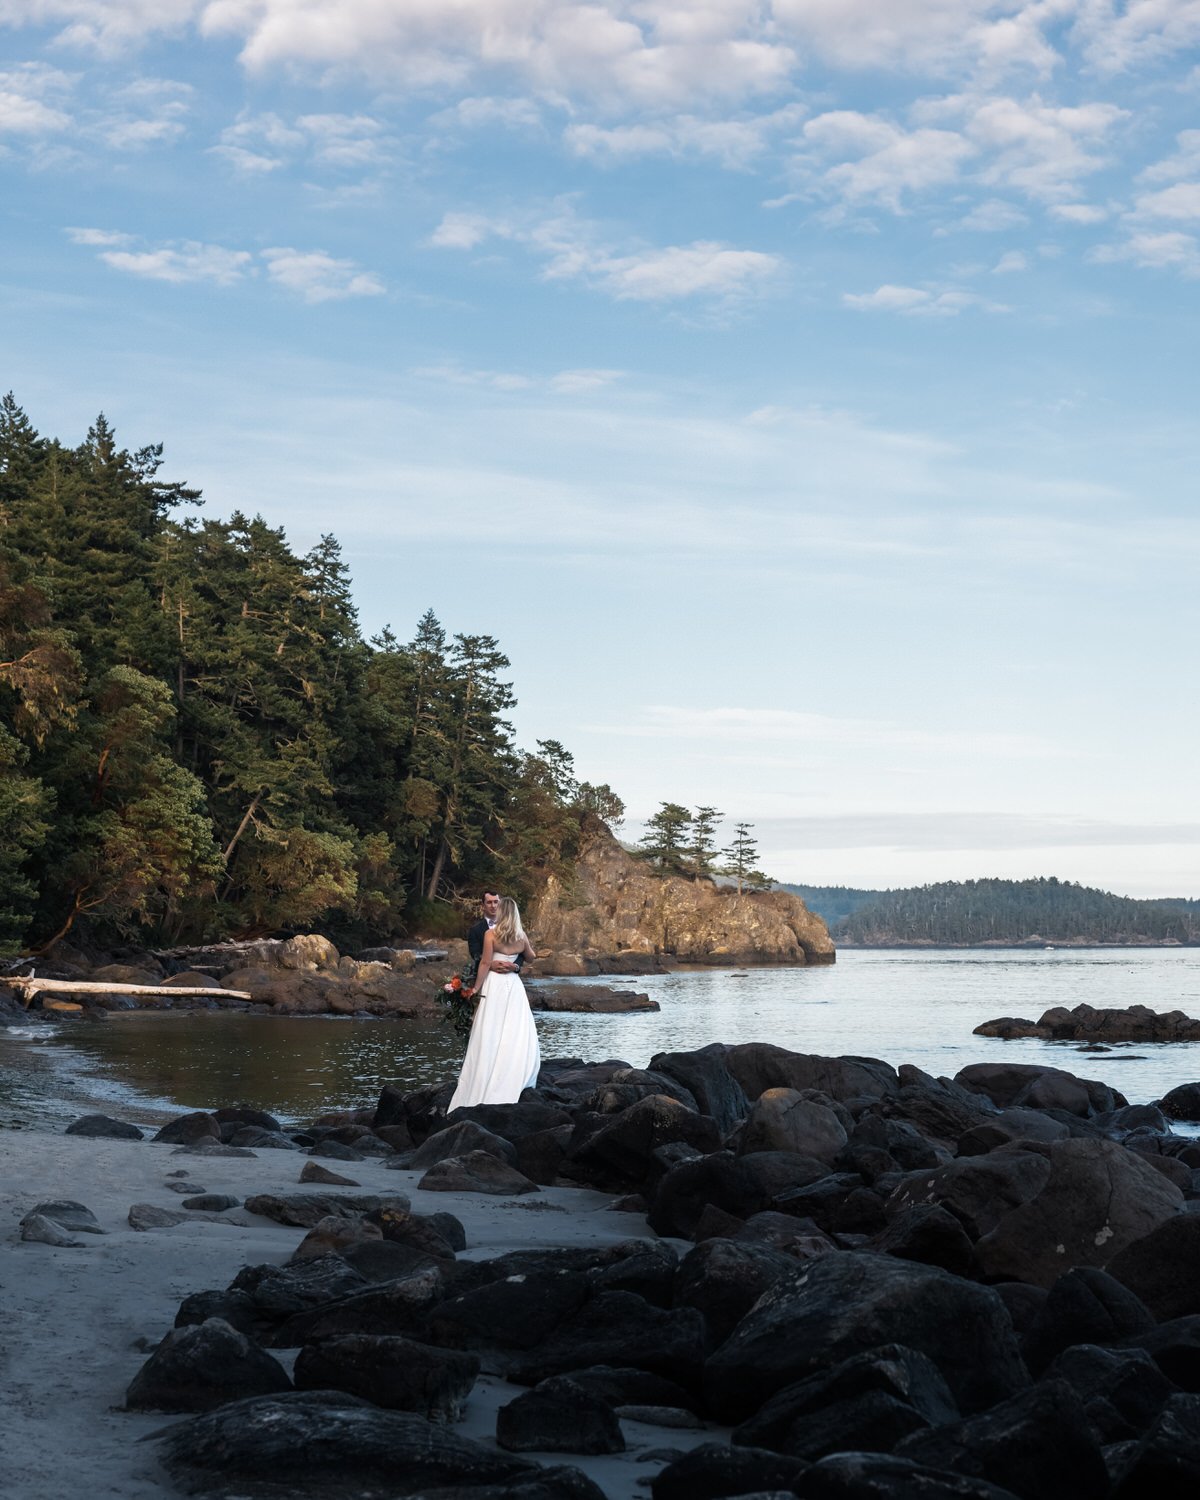 Vancouver Island Adventure Elopement and Small Wedding Photographer - Allie Knull's Photography-74.jpg